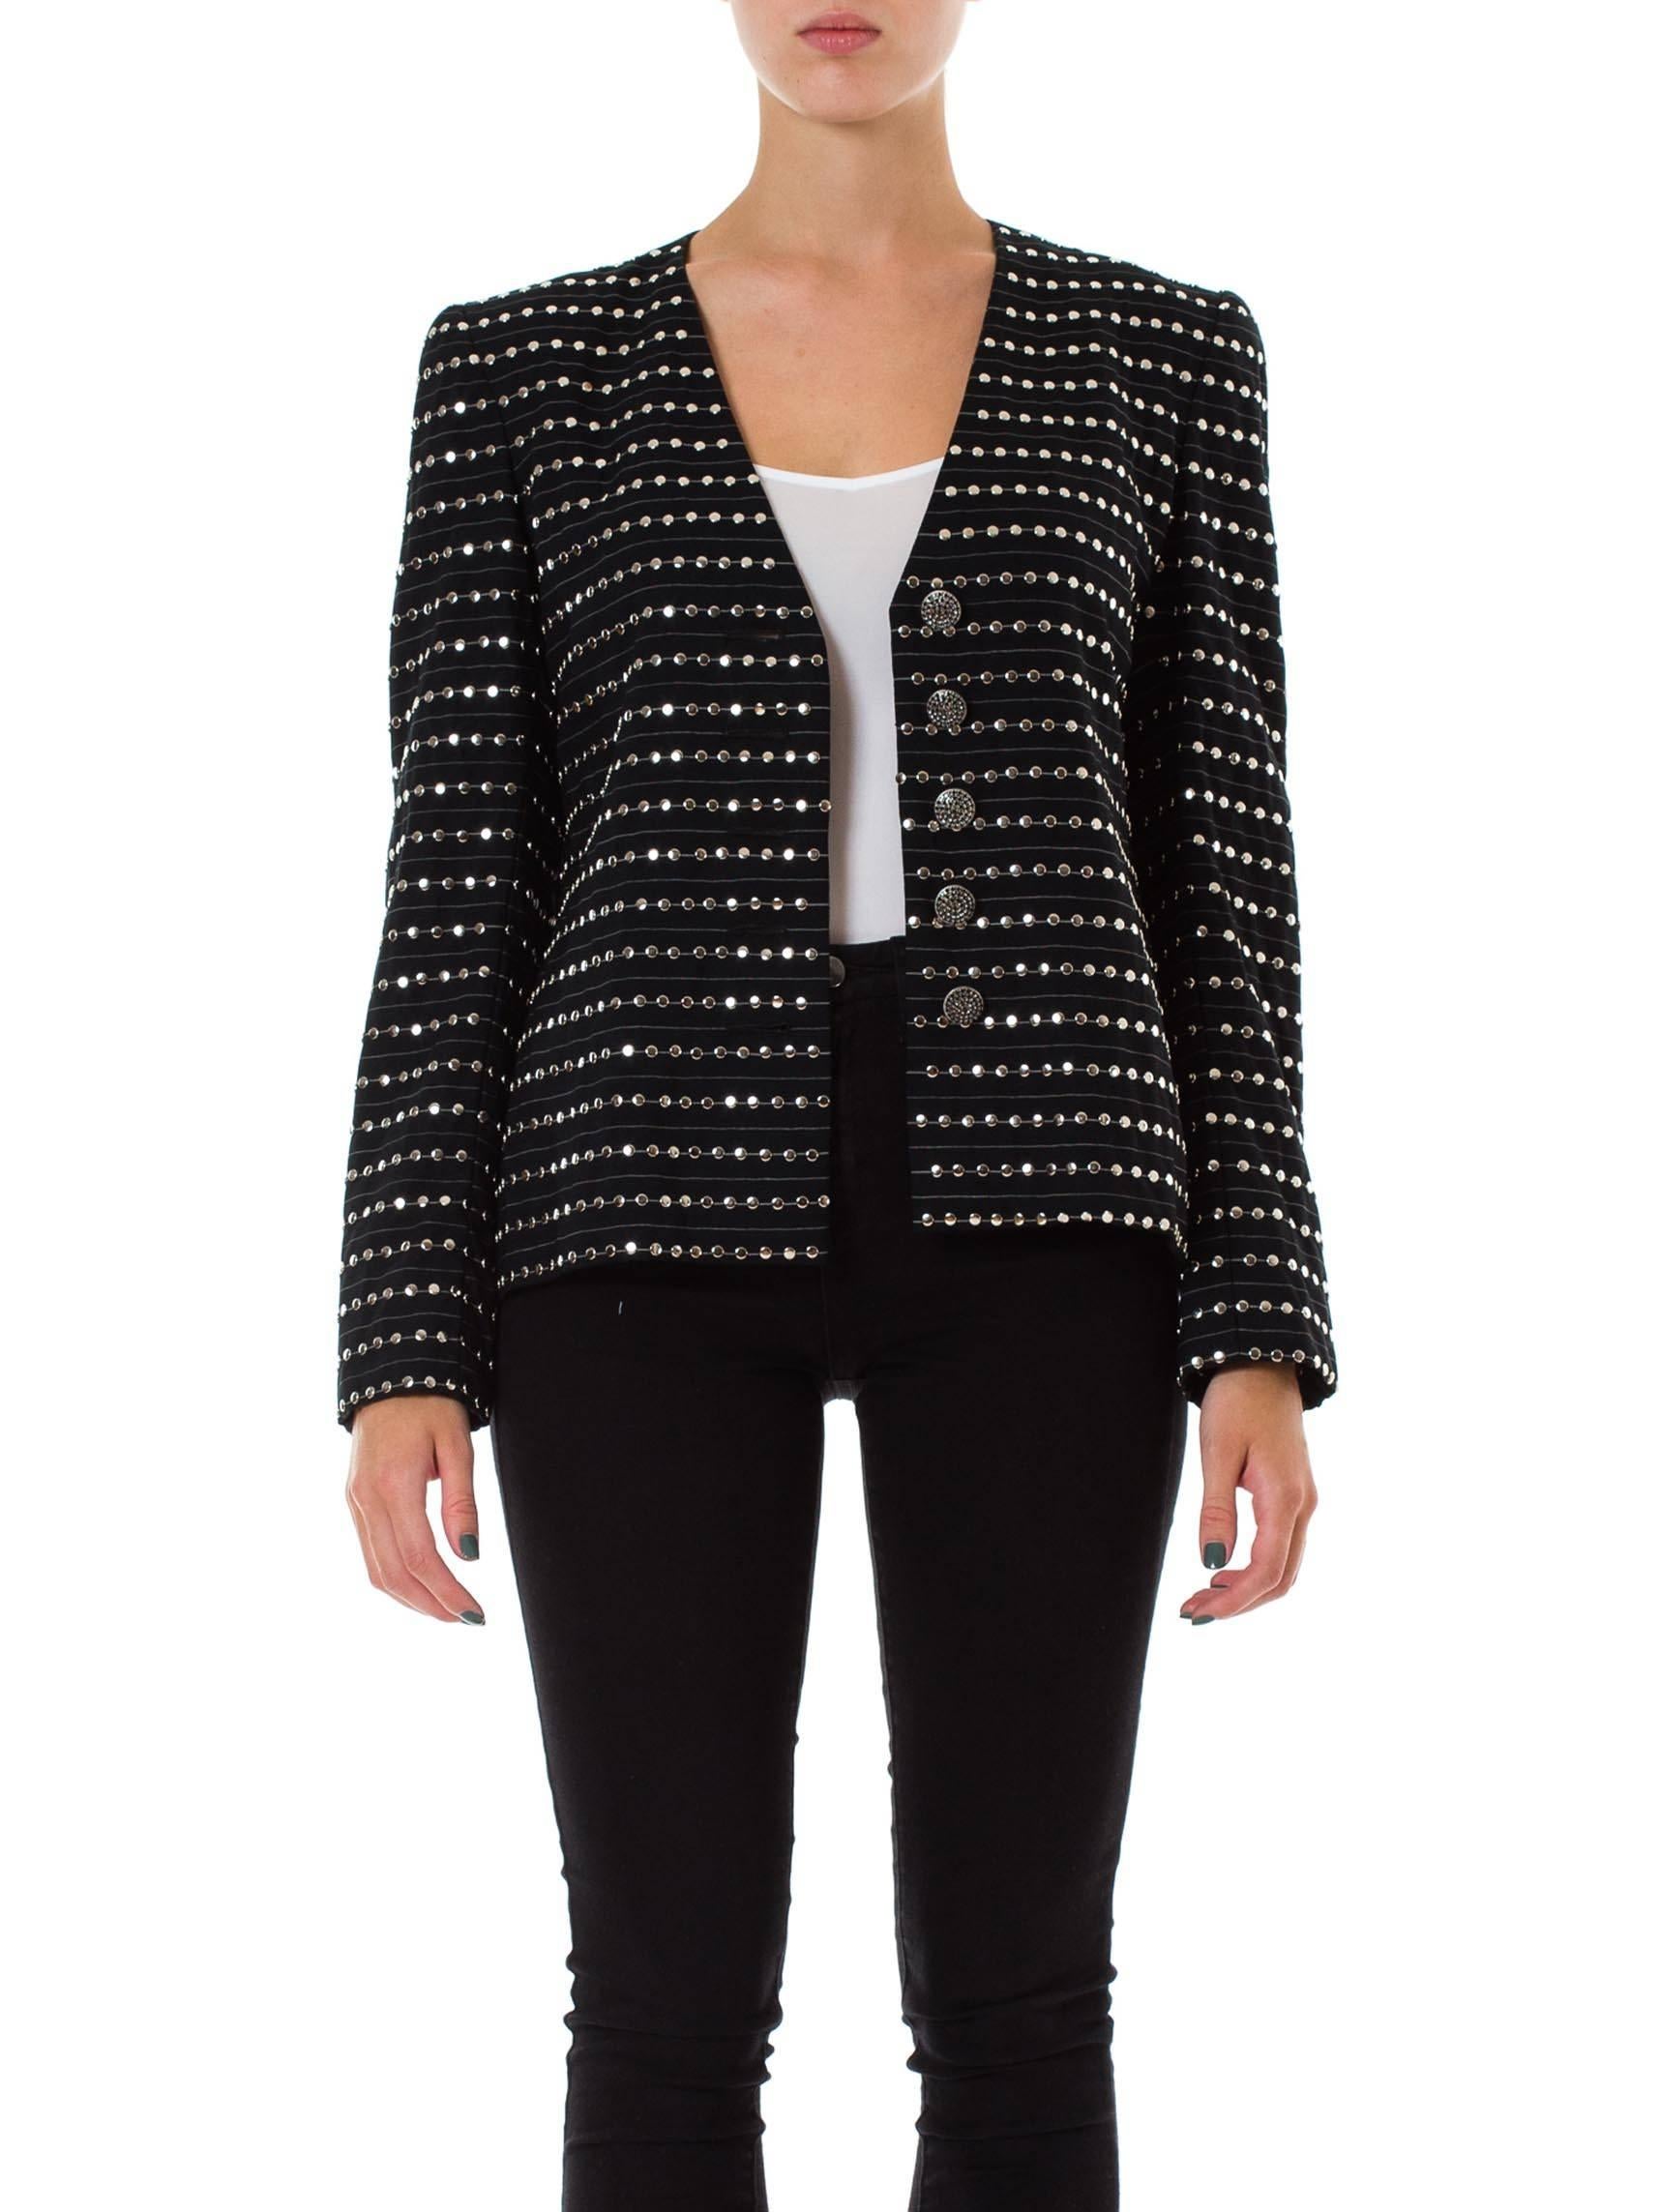 Rock and roll goes to the boardroom must have been what James Galanos  was thinking when he designed this jacket. Traditional suiting pinstripe wool has been used horizontally with rows and rows of hand applied metal studs. This isn't the cheap St